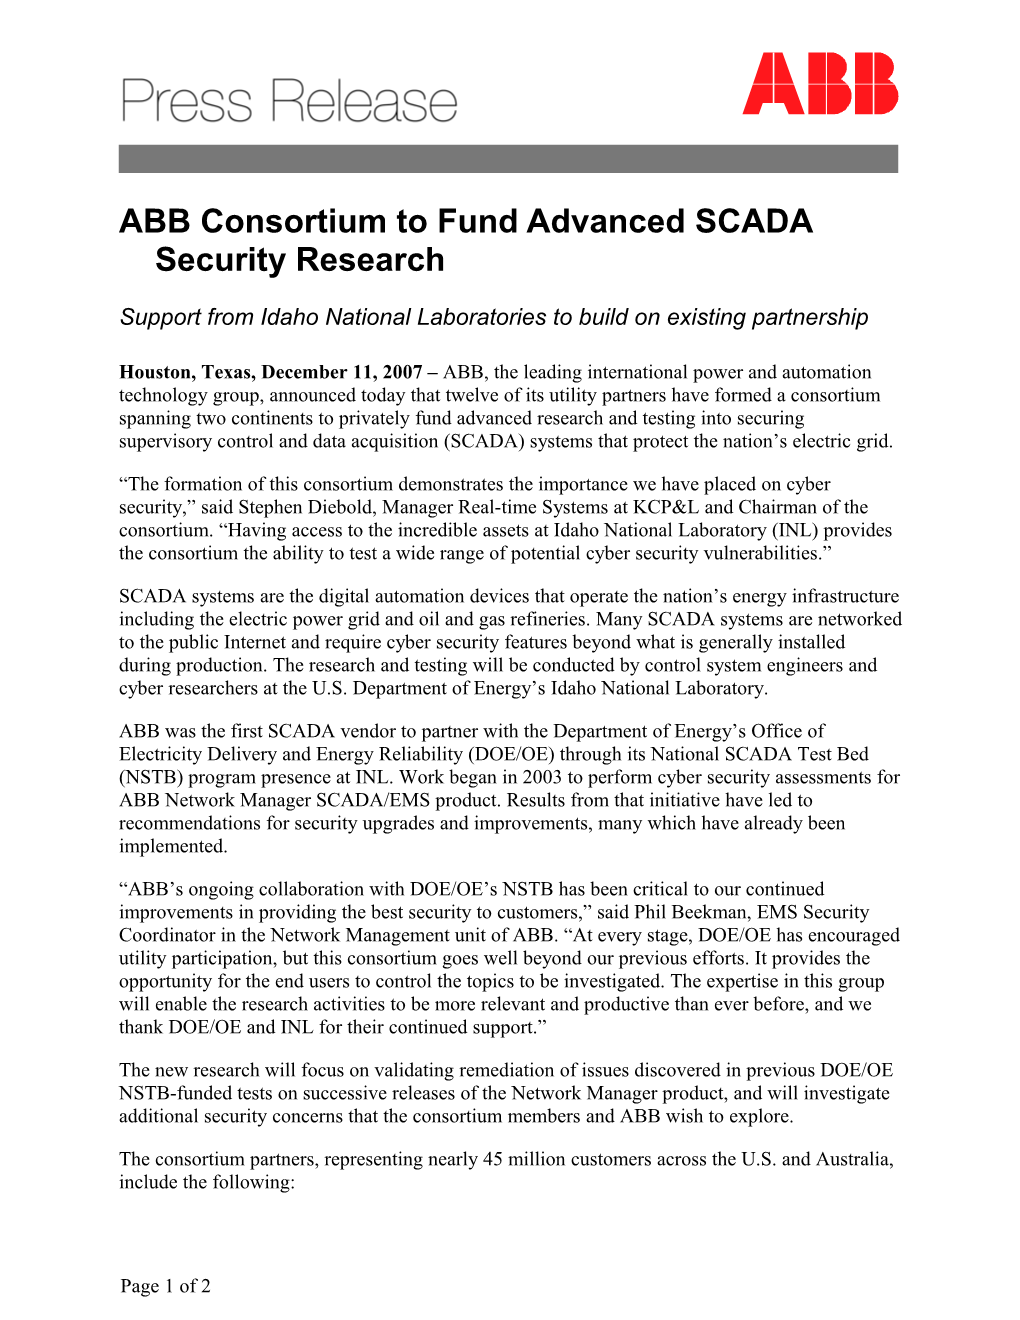 ABB Consortium to Fund Advanced SCADA Security Research